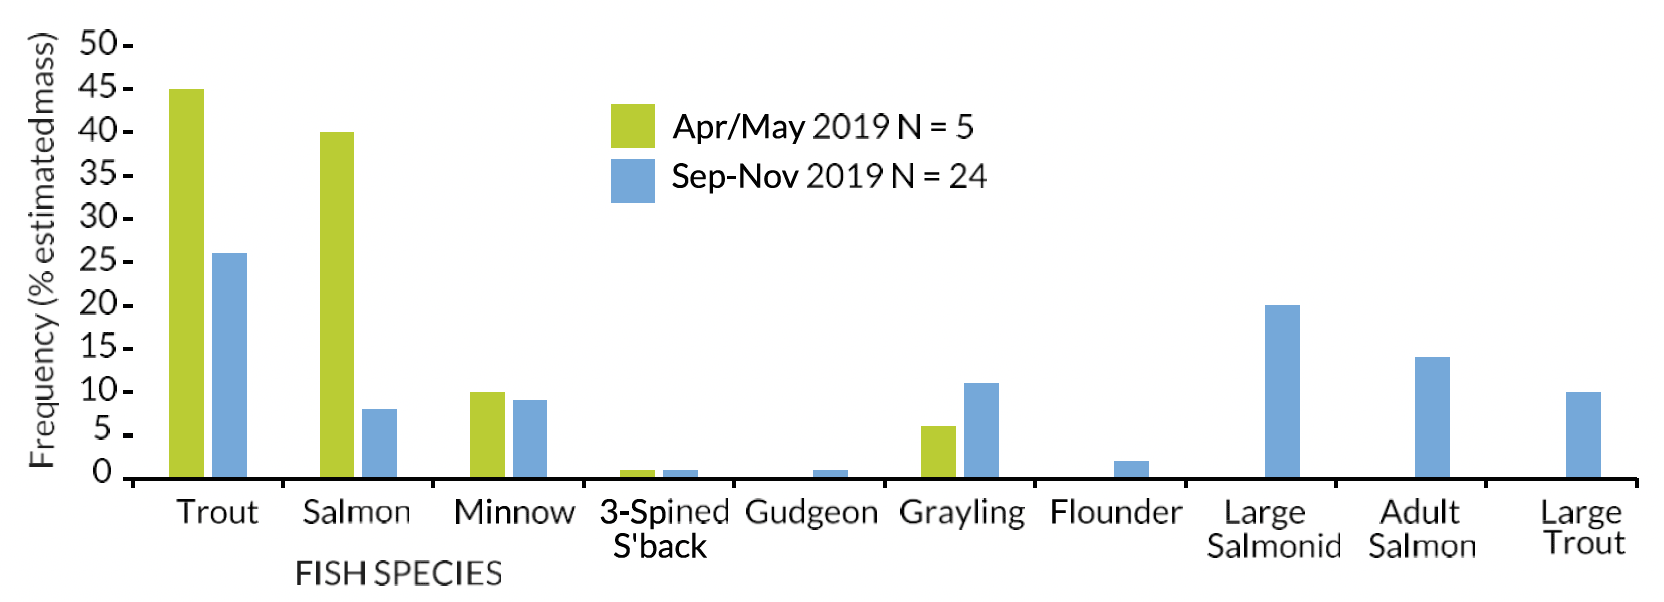 Bar chart showing diet comparisons for River Tweed Goosanders: early autumn (Sep-Oct 2019) and late autumn (Dec 2019) samples